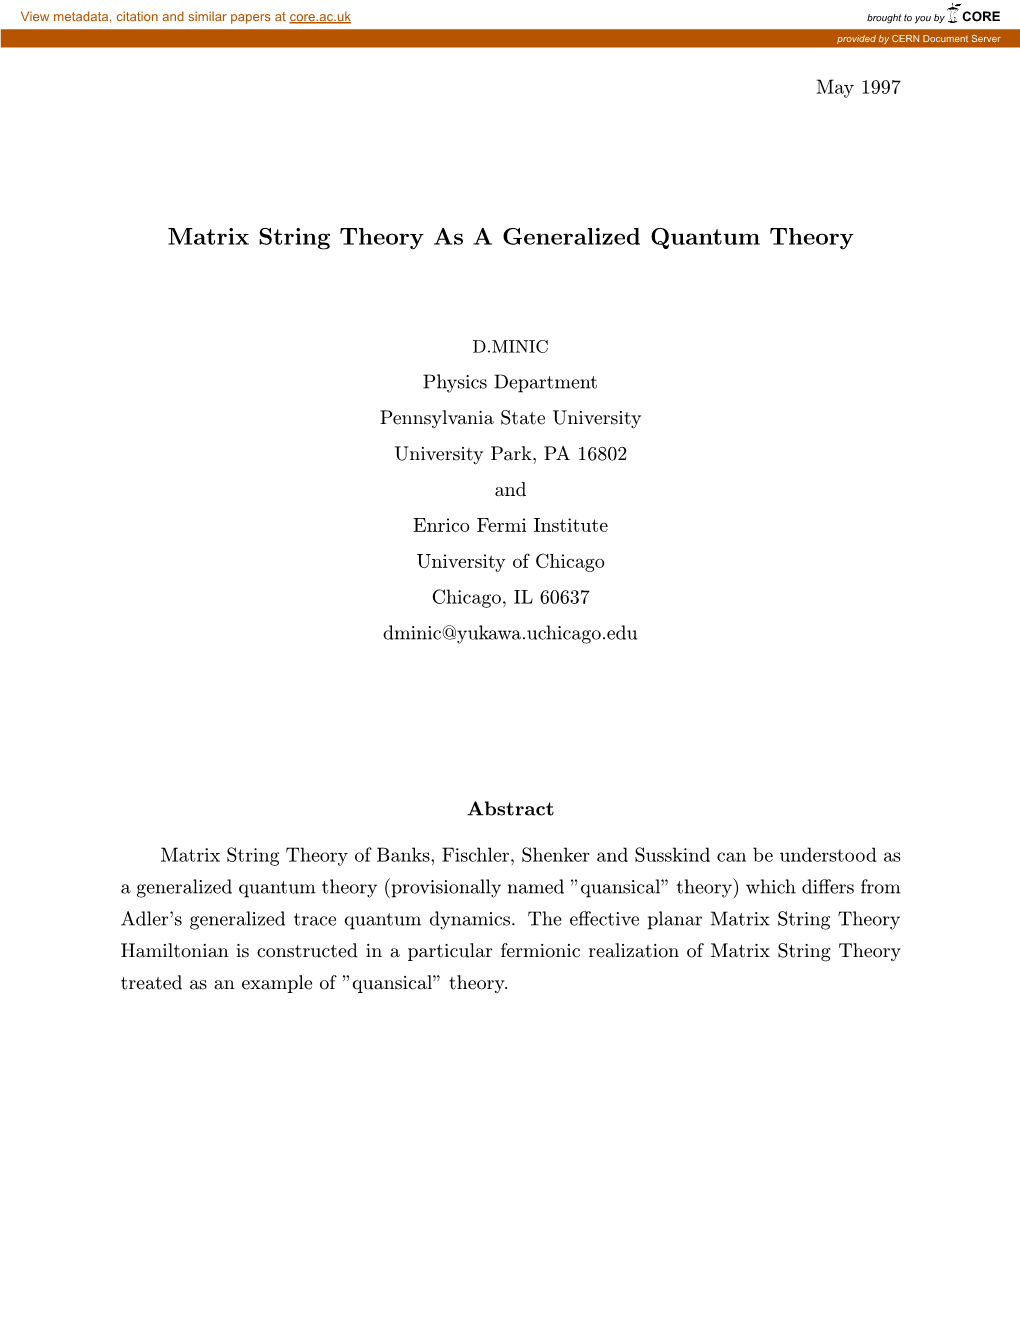 Matrix String Theory As a Generalized Quantum Theory